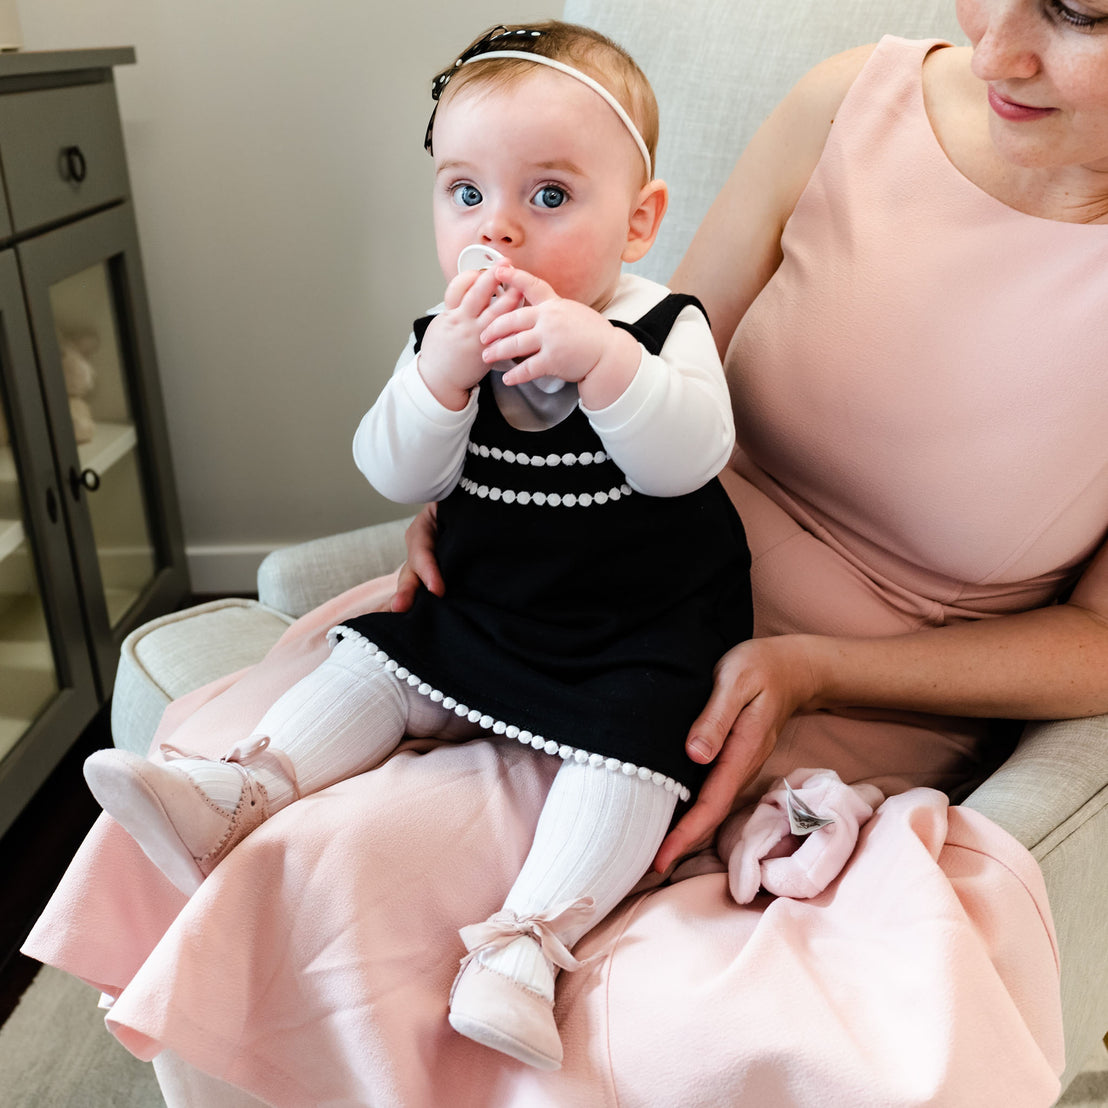 A mother in a pink dress holds her baby girl, wearing a black and white dress with a pearl trim and white socks, sitting on her lap. The baby is chewing on her pacifier and also wearing June Suede Tie Mary Janes.